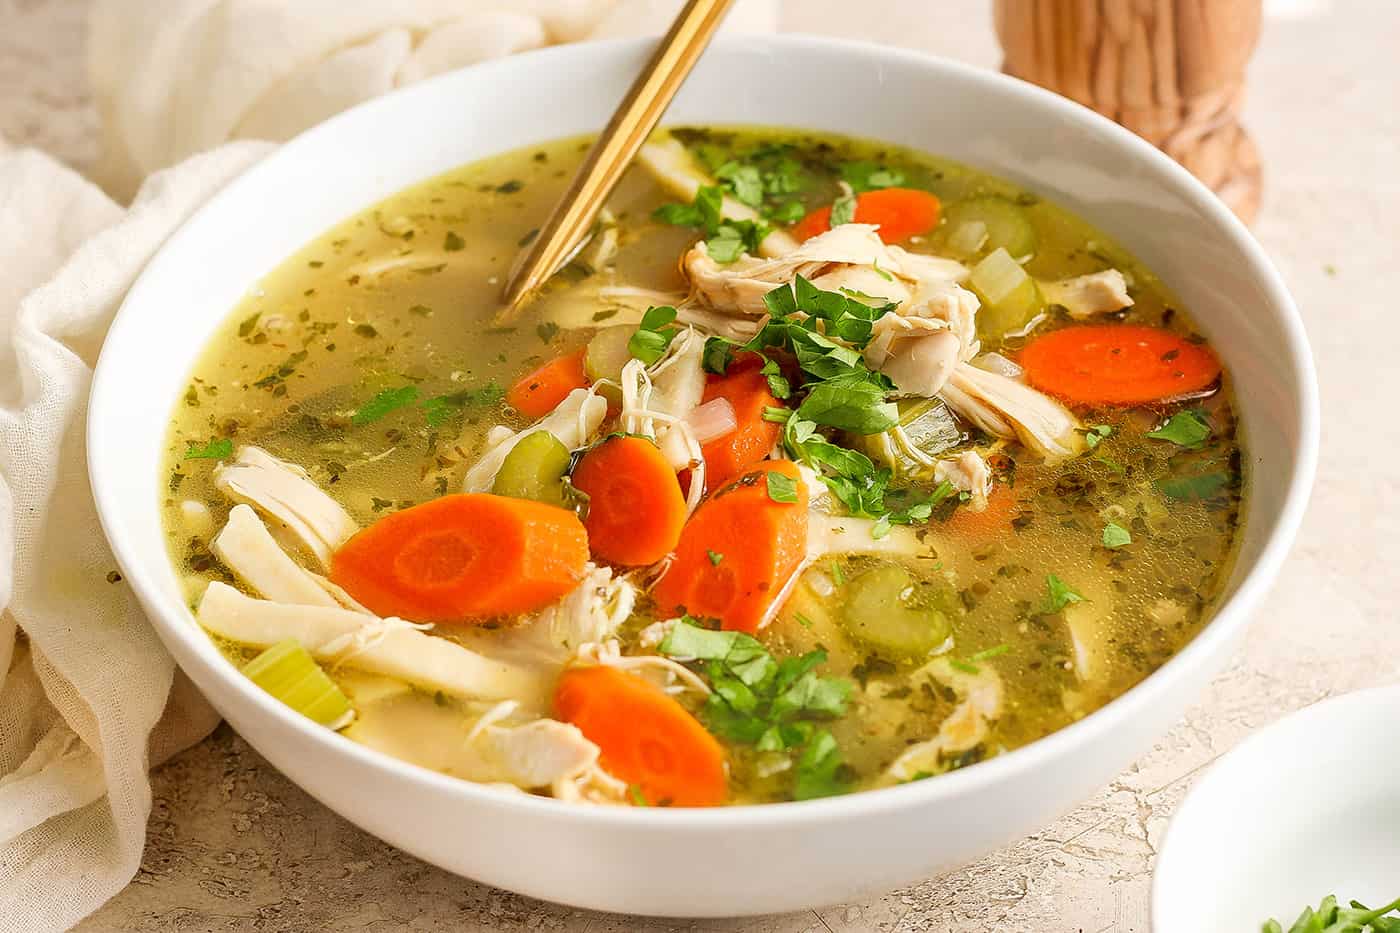 Chunks of chicken and vegetables are seen in a bowl of chicken noodle soup.